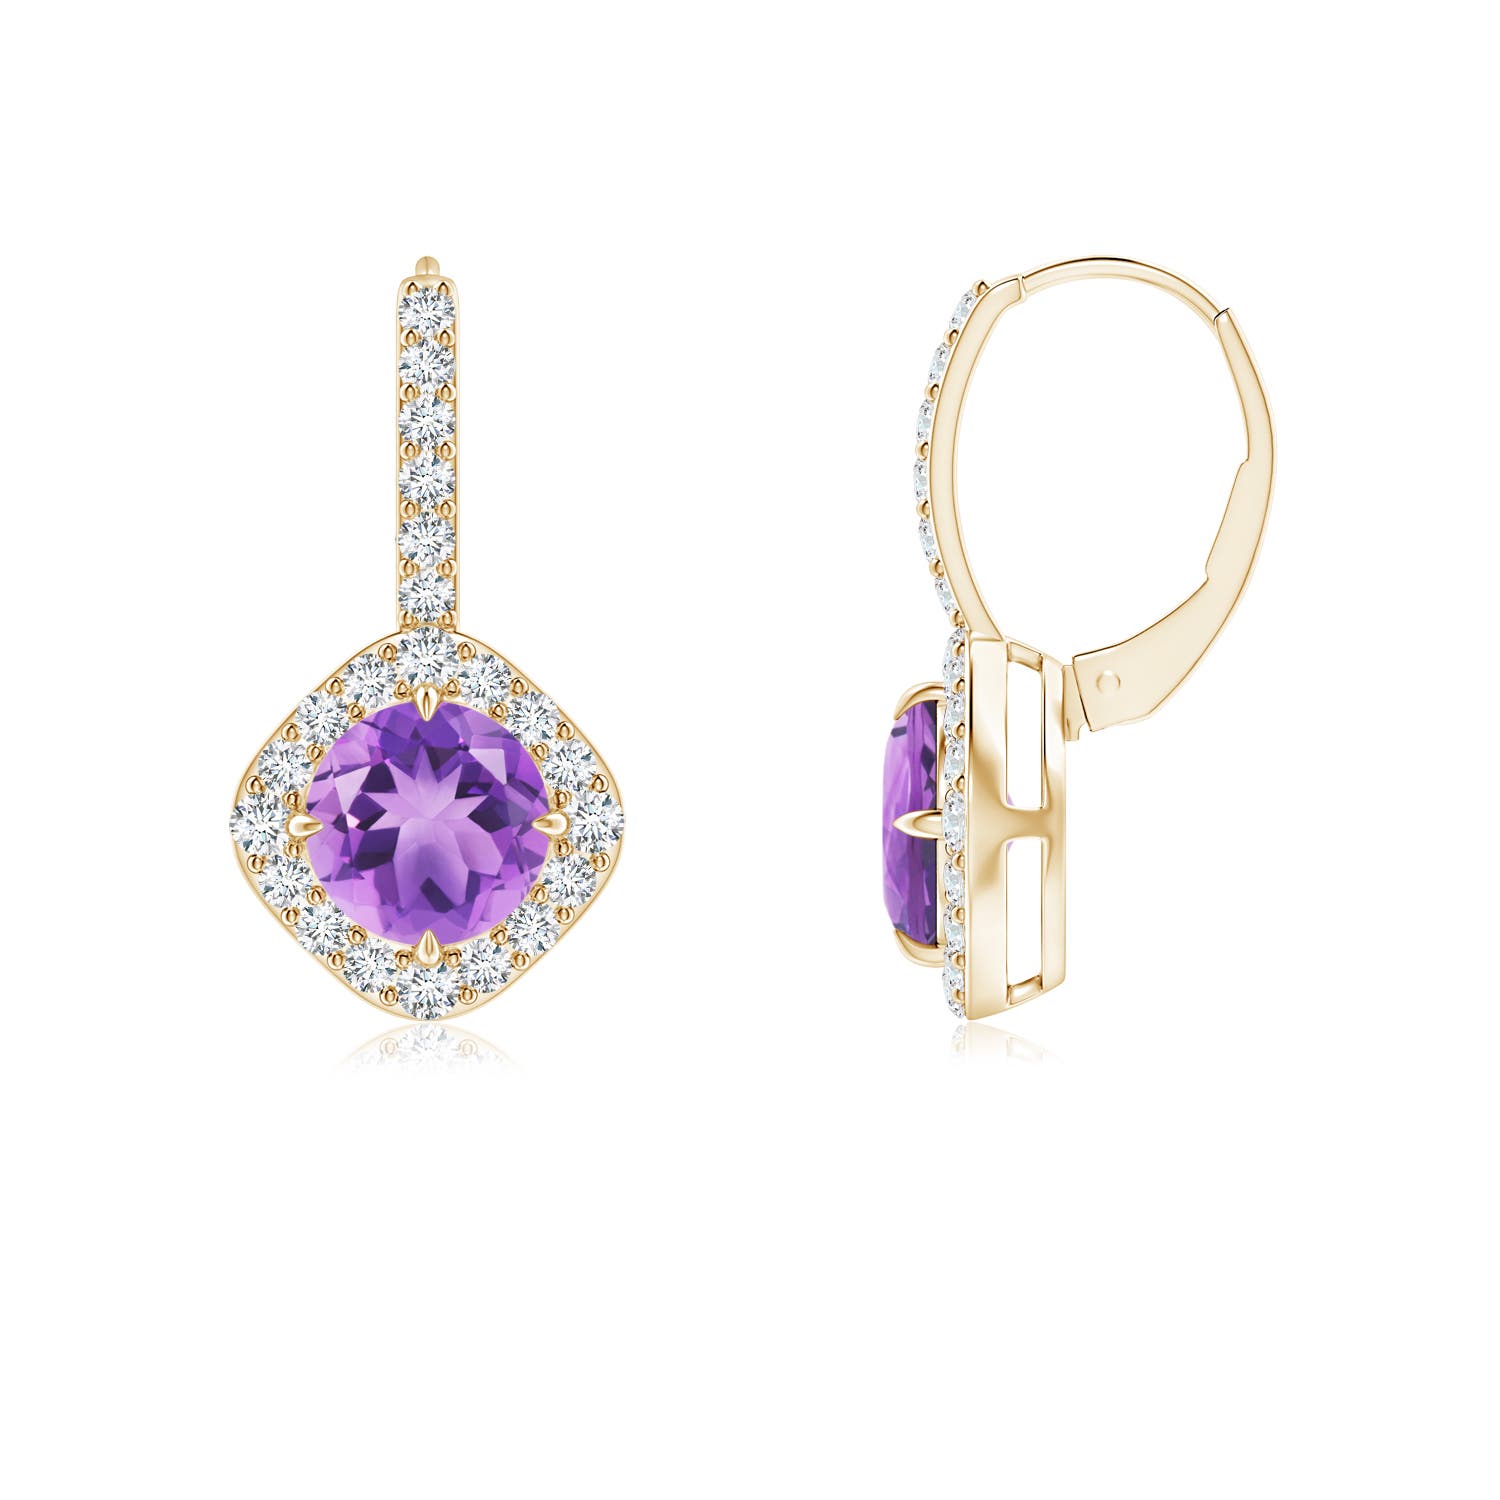 A - Amethyst / 1.98 CT / 14 KT Yellow Gold